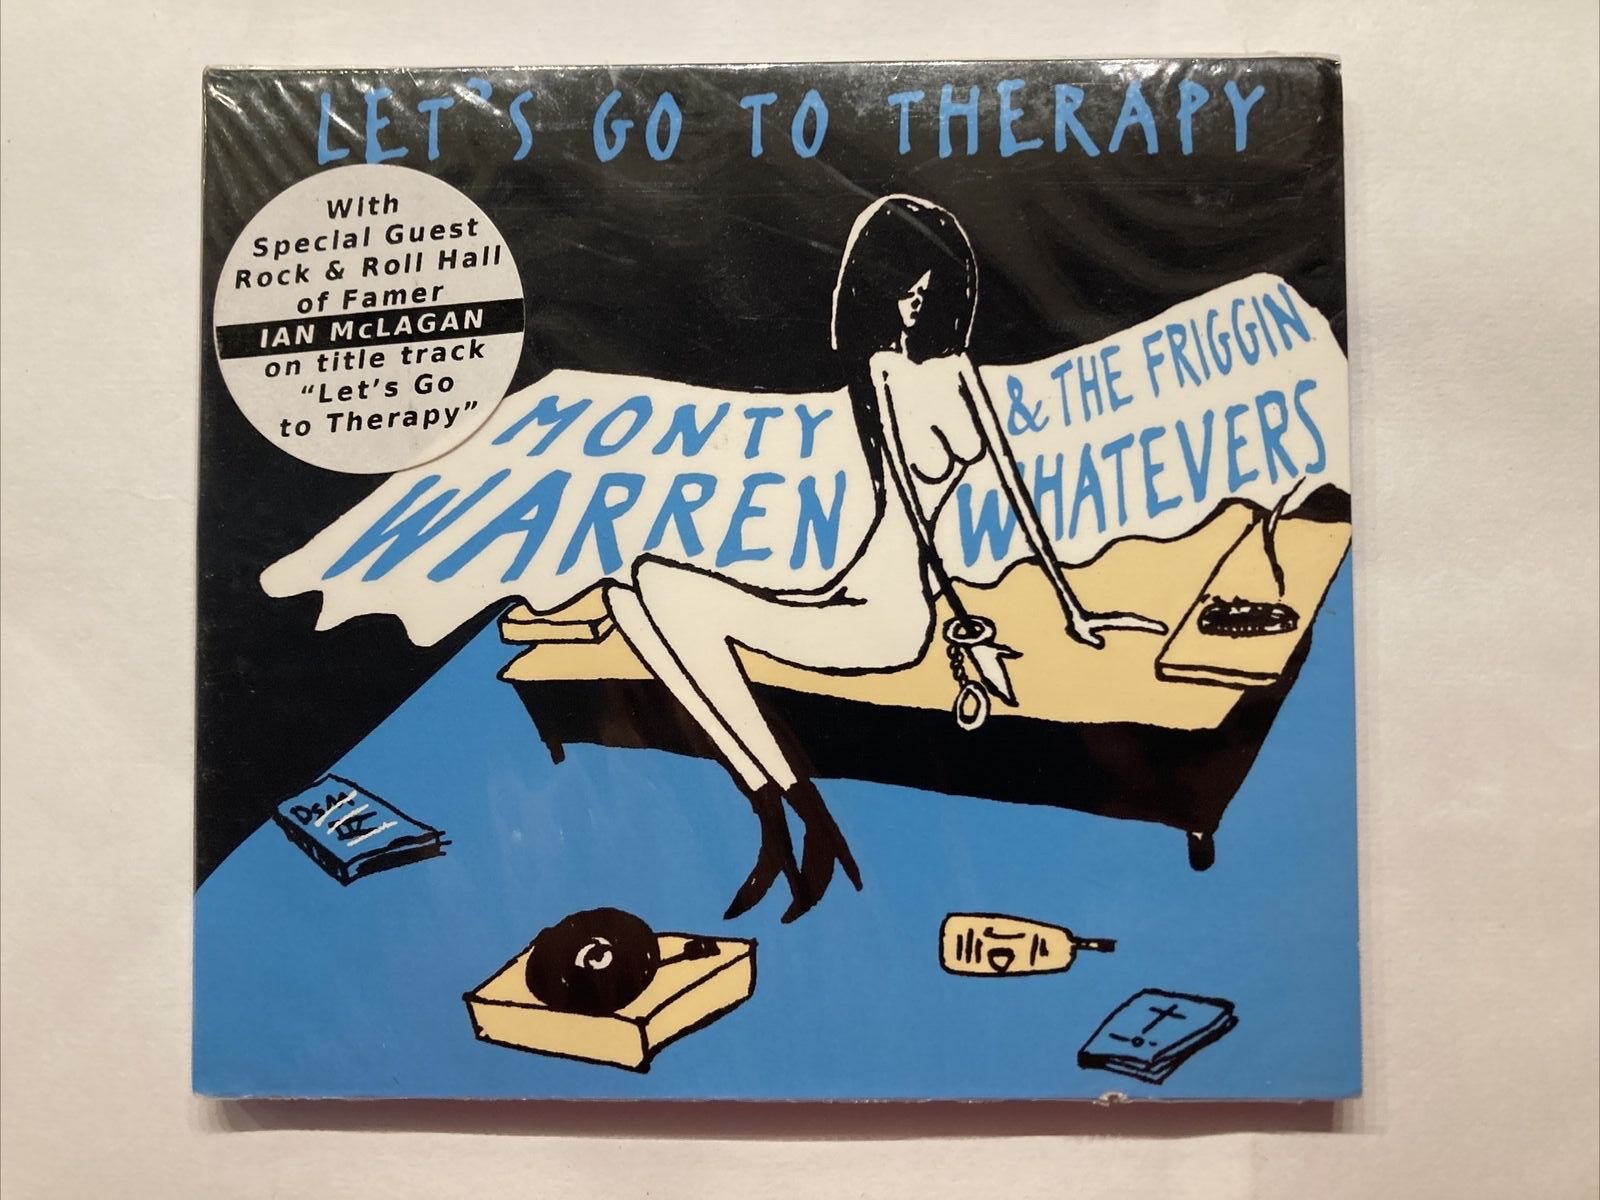 Let's Go to Therapy - Warren, Monty & the Friggin Whatevers CD - Ian McLagan New